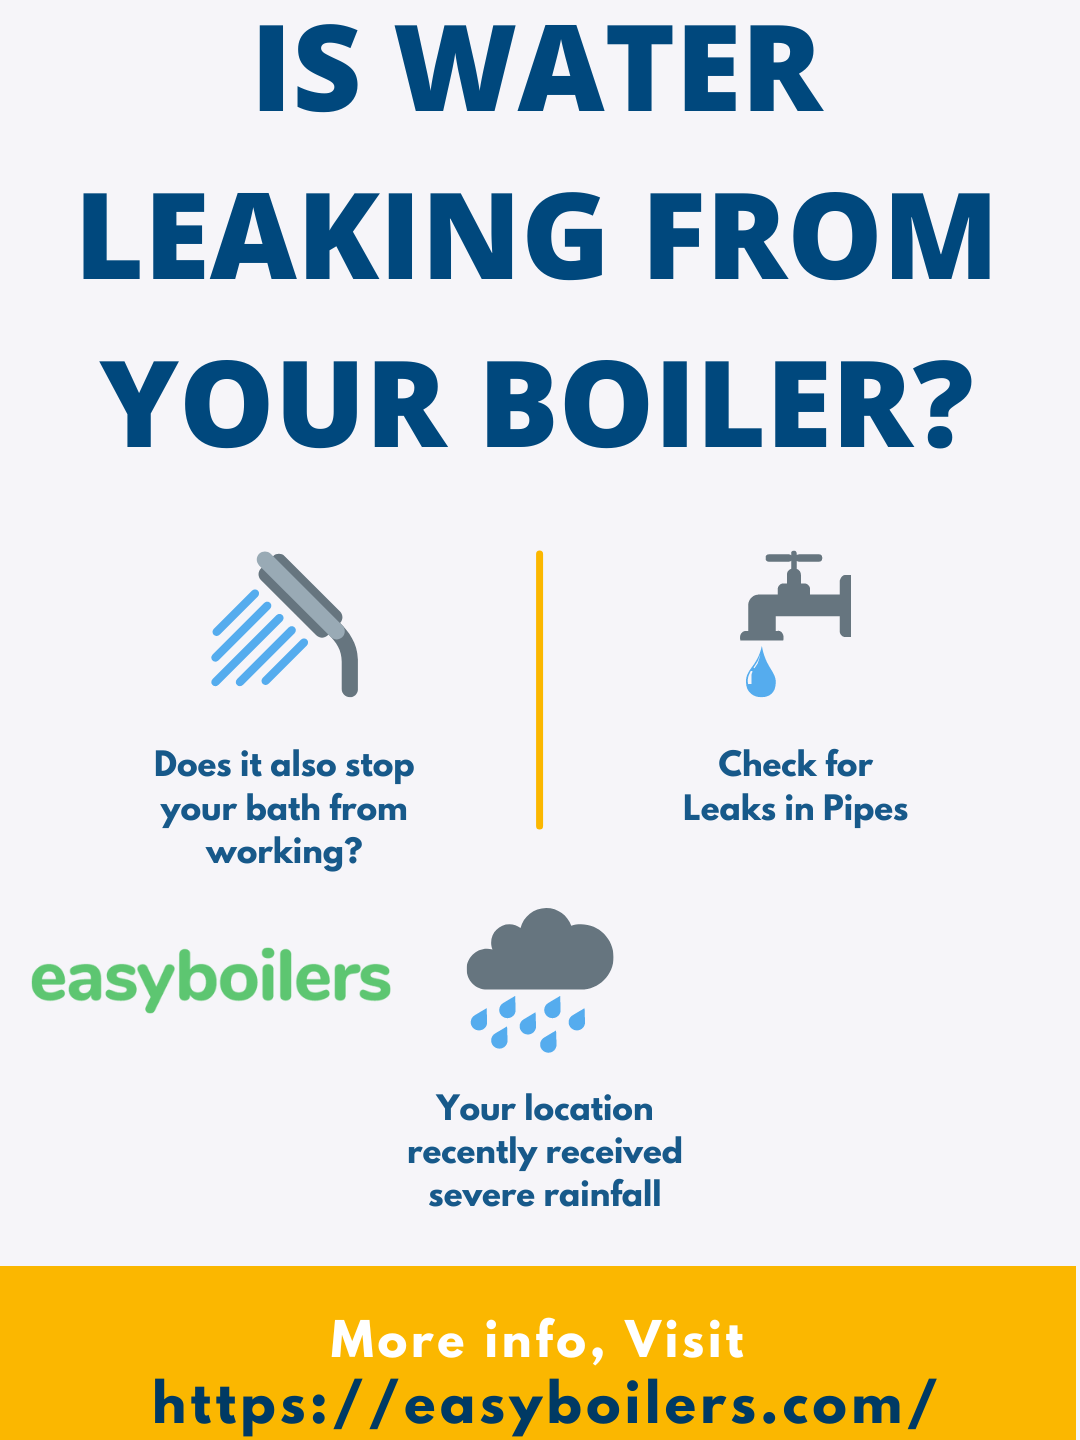 is water leaking from your boiler?